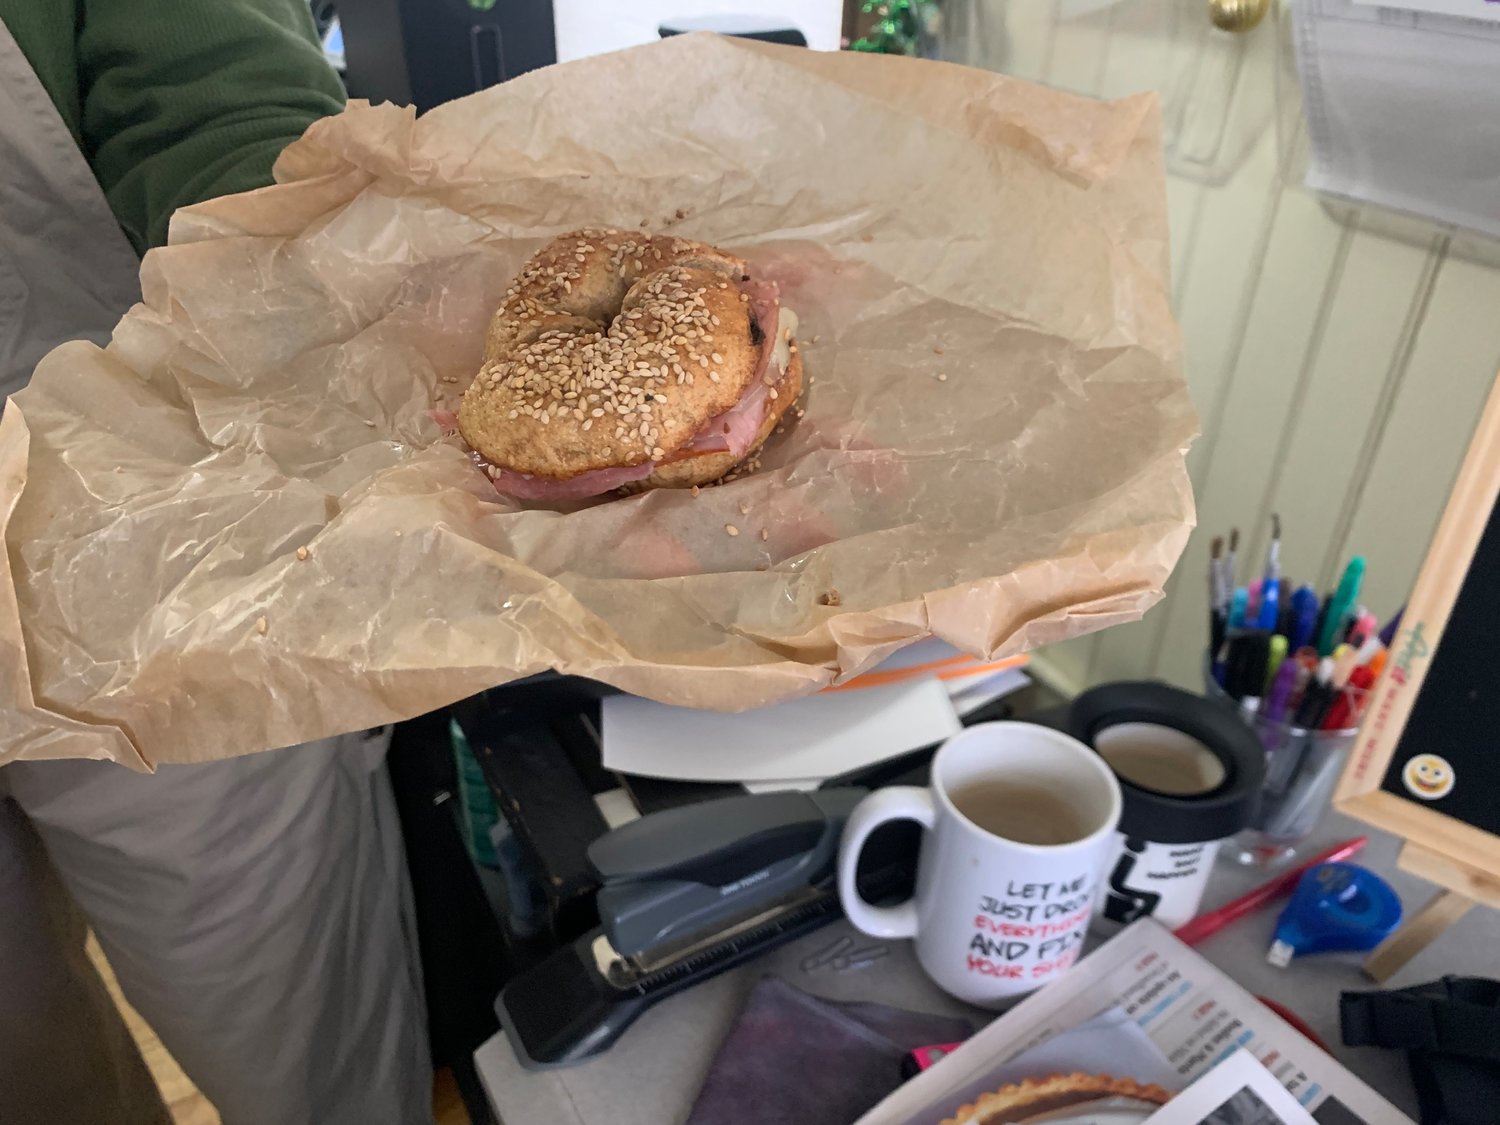 Each morning, I offer Amanda a half of a bagel sandwich --  a little "Breakfast" nosh. This was the first of my fourth bagel batch. "I used some rye flour this time. They are a little bit denser.